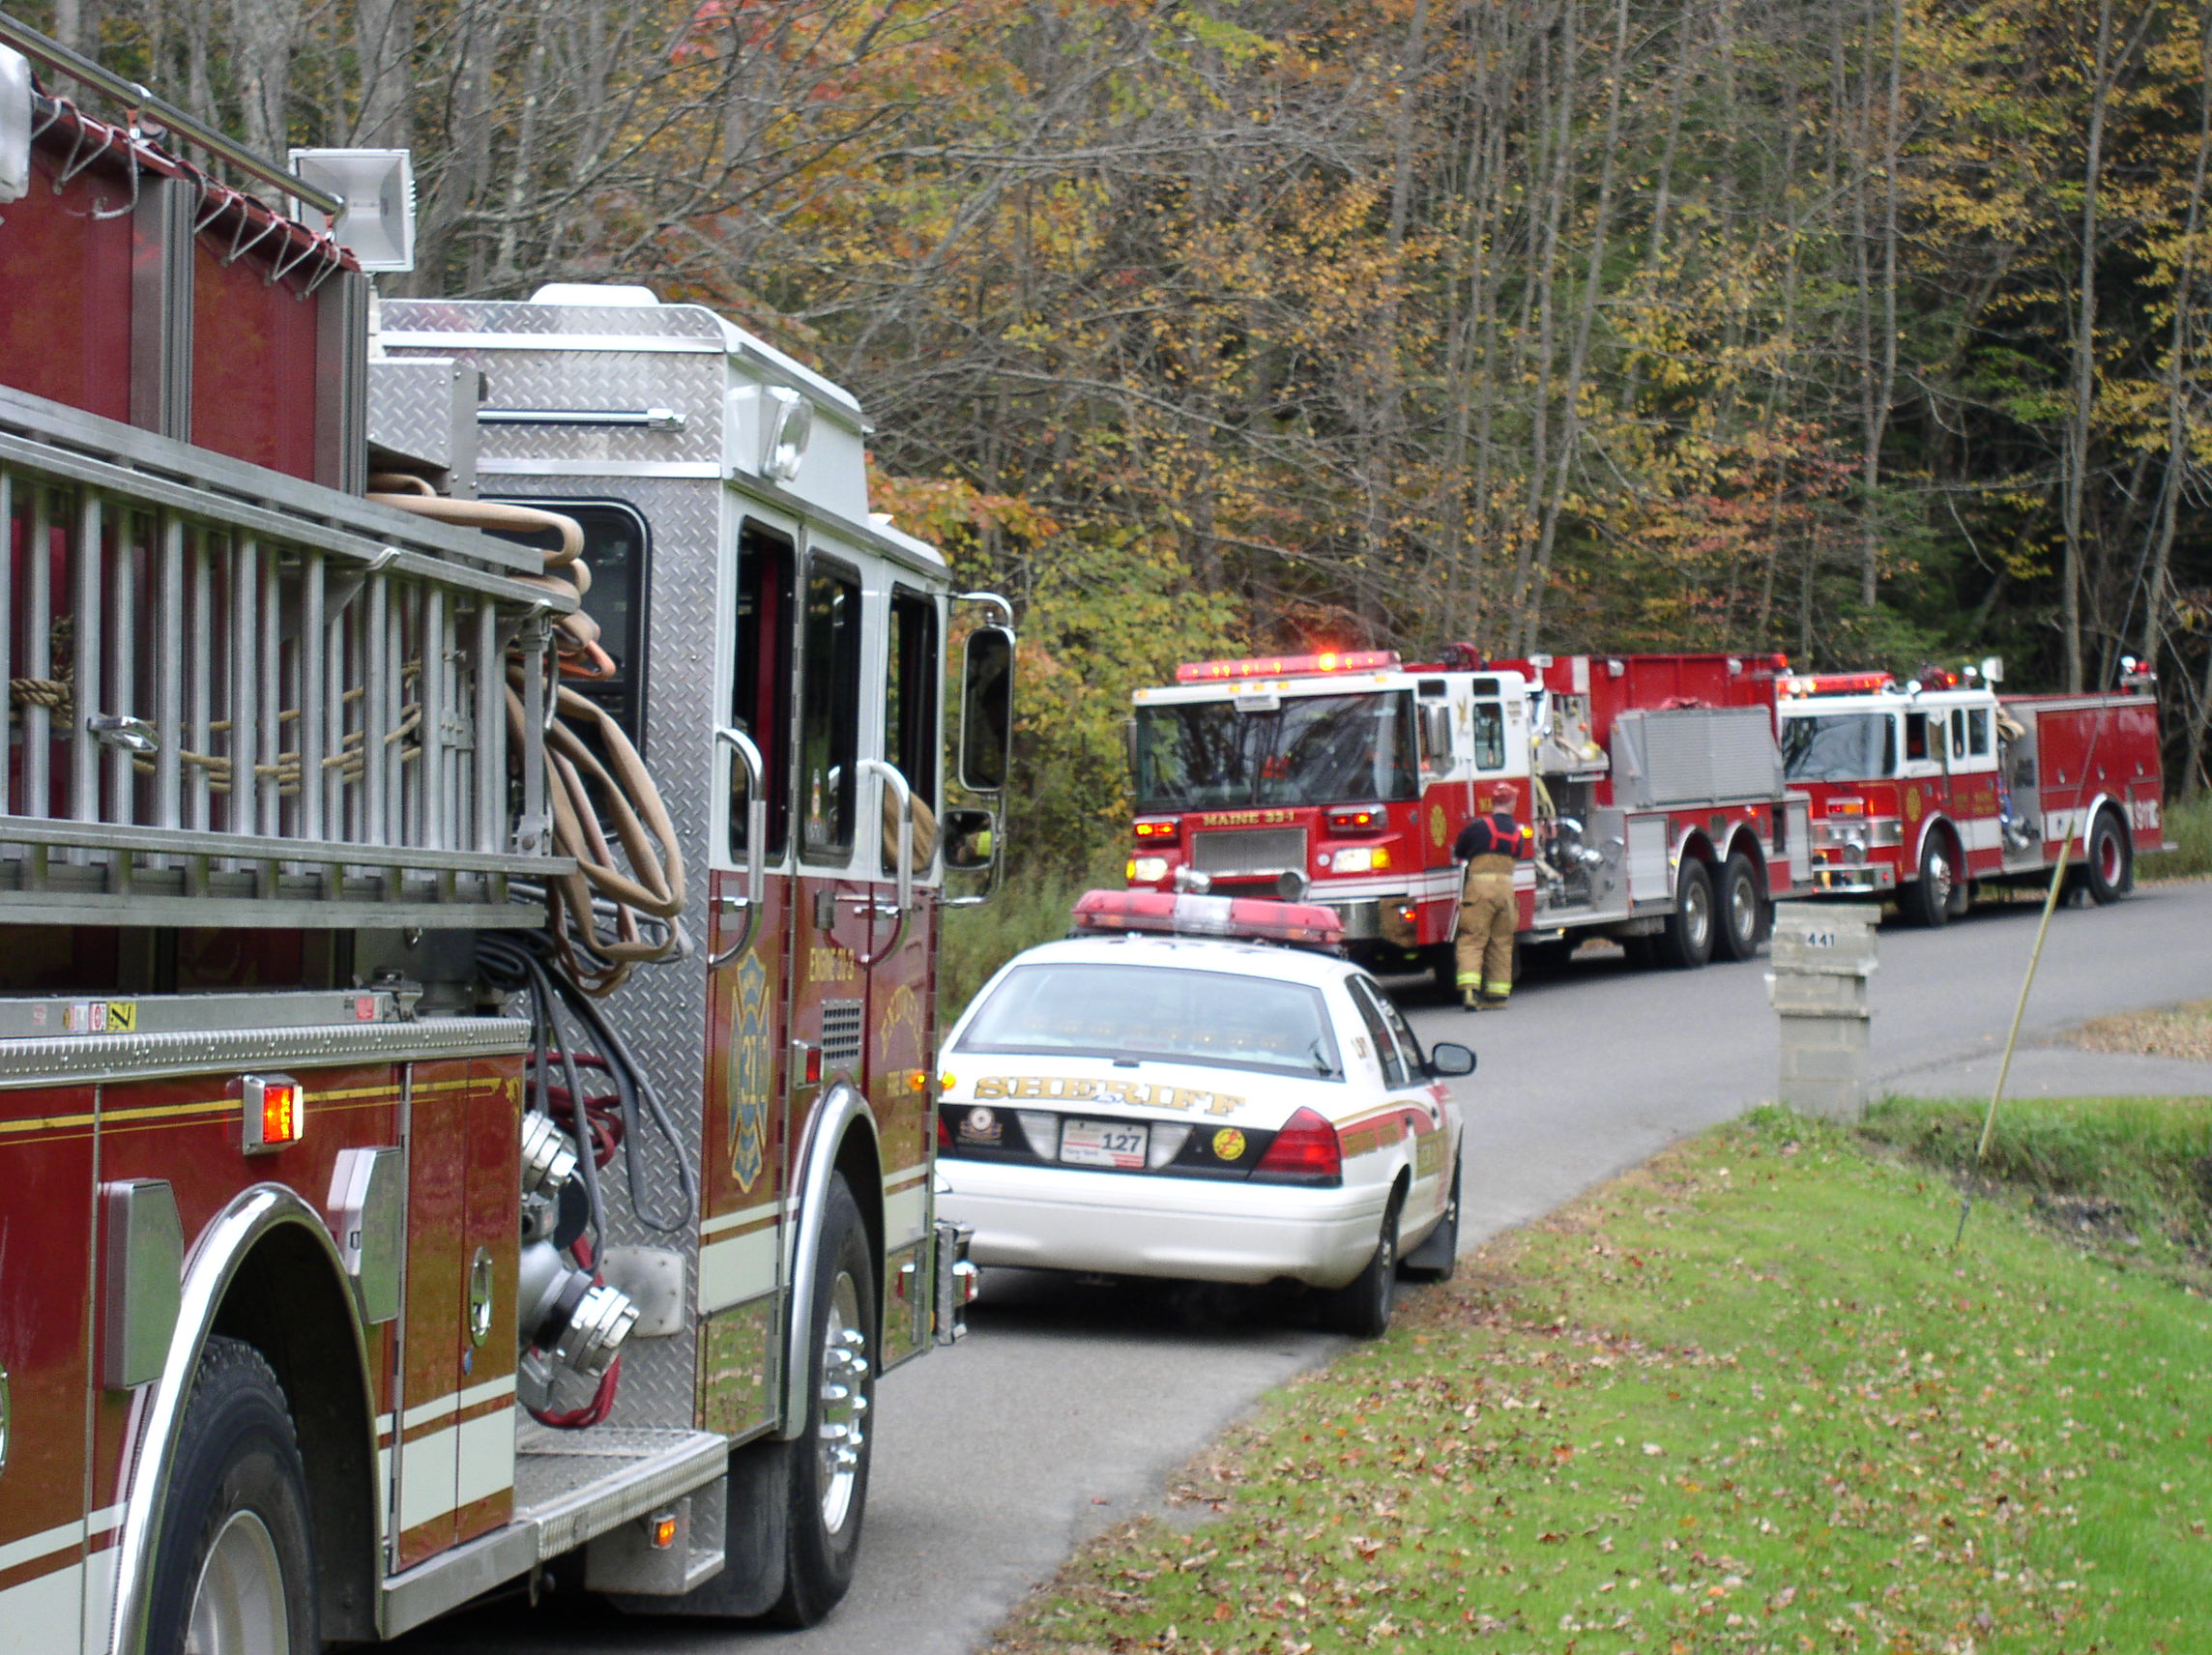 10-12-04  Response - Fire - Mutual Aid UC - Fredreick Rd